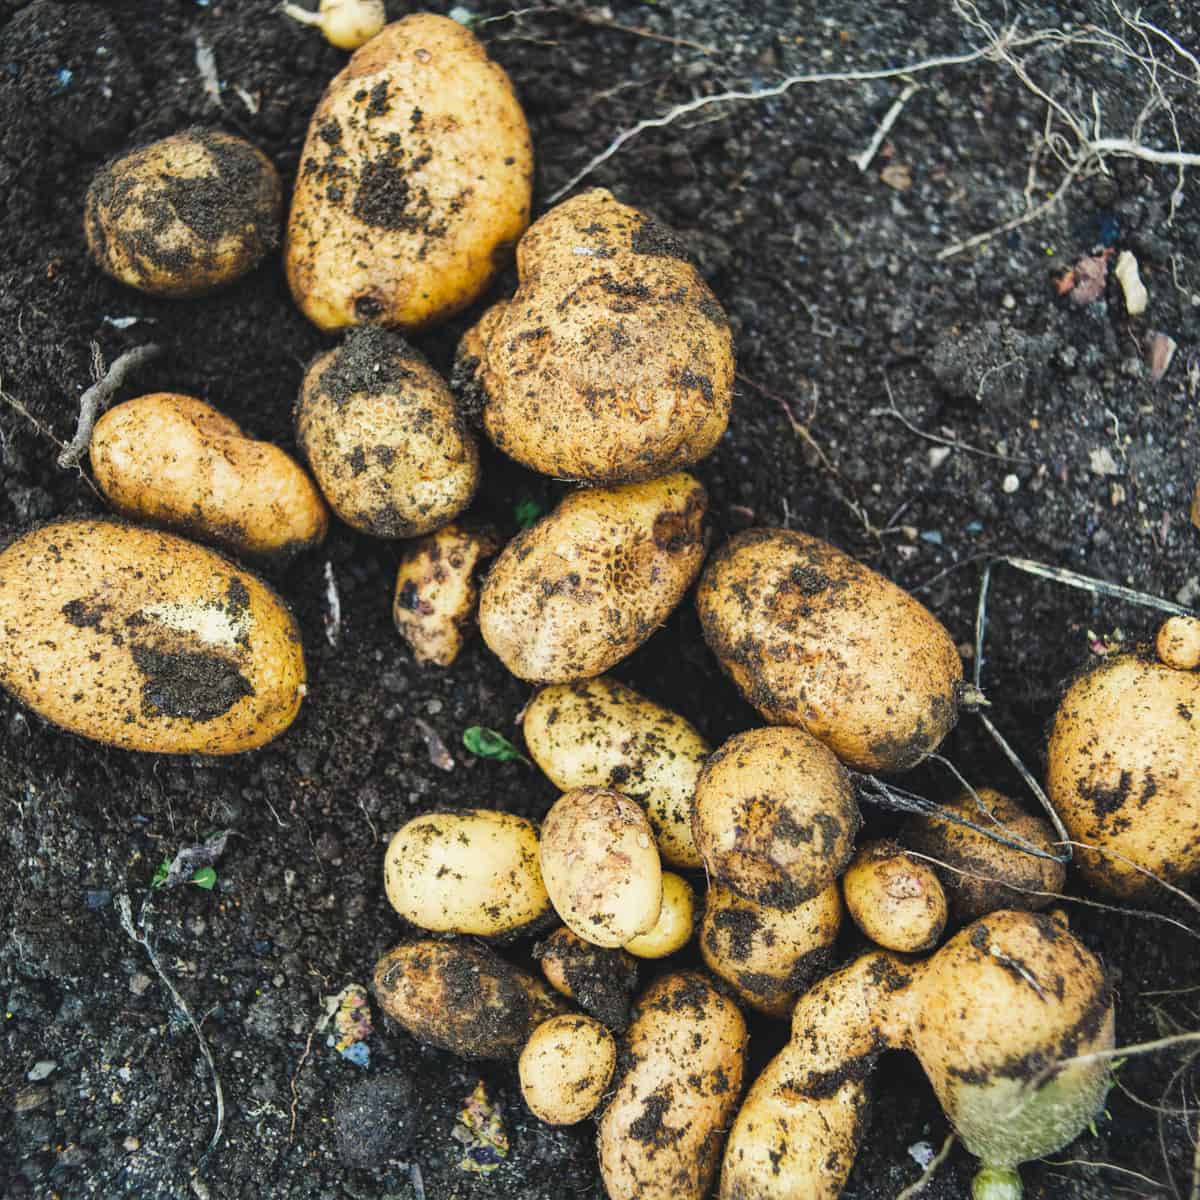 Growing potatoes from seed potatoes